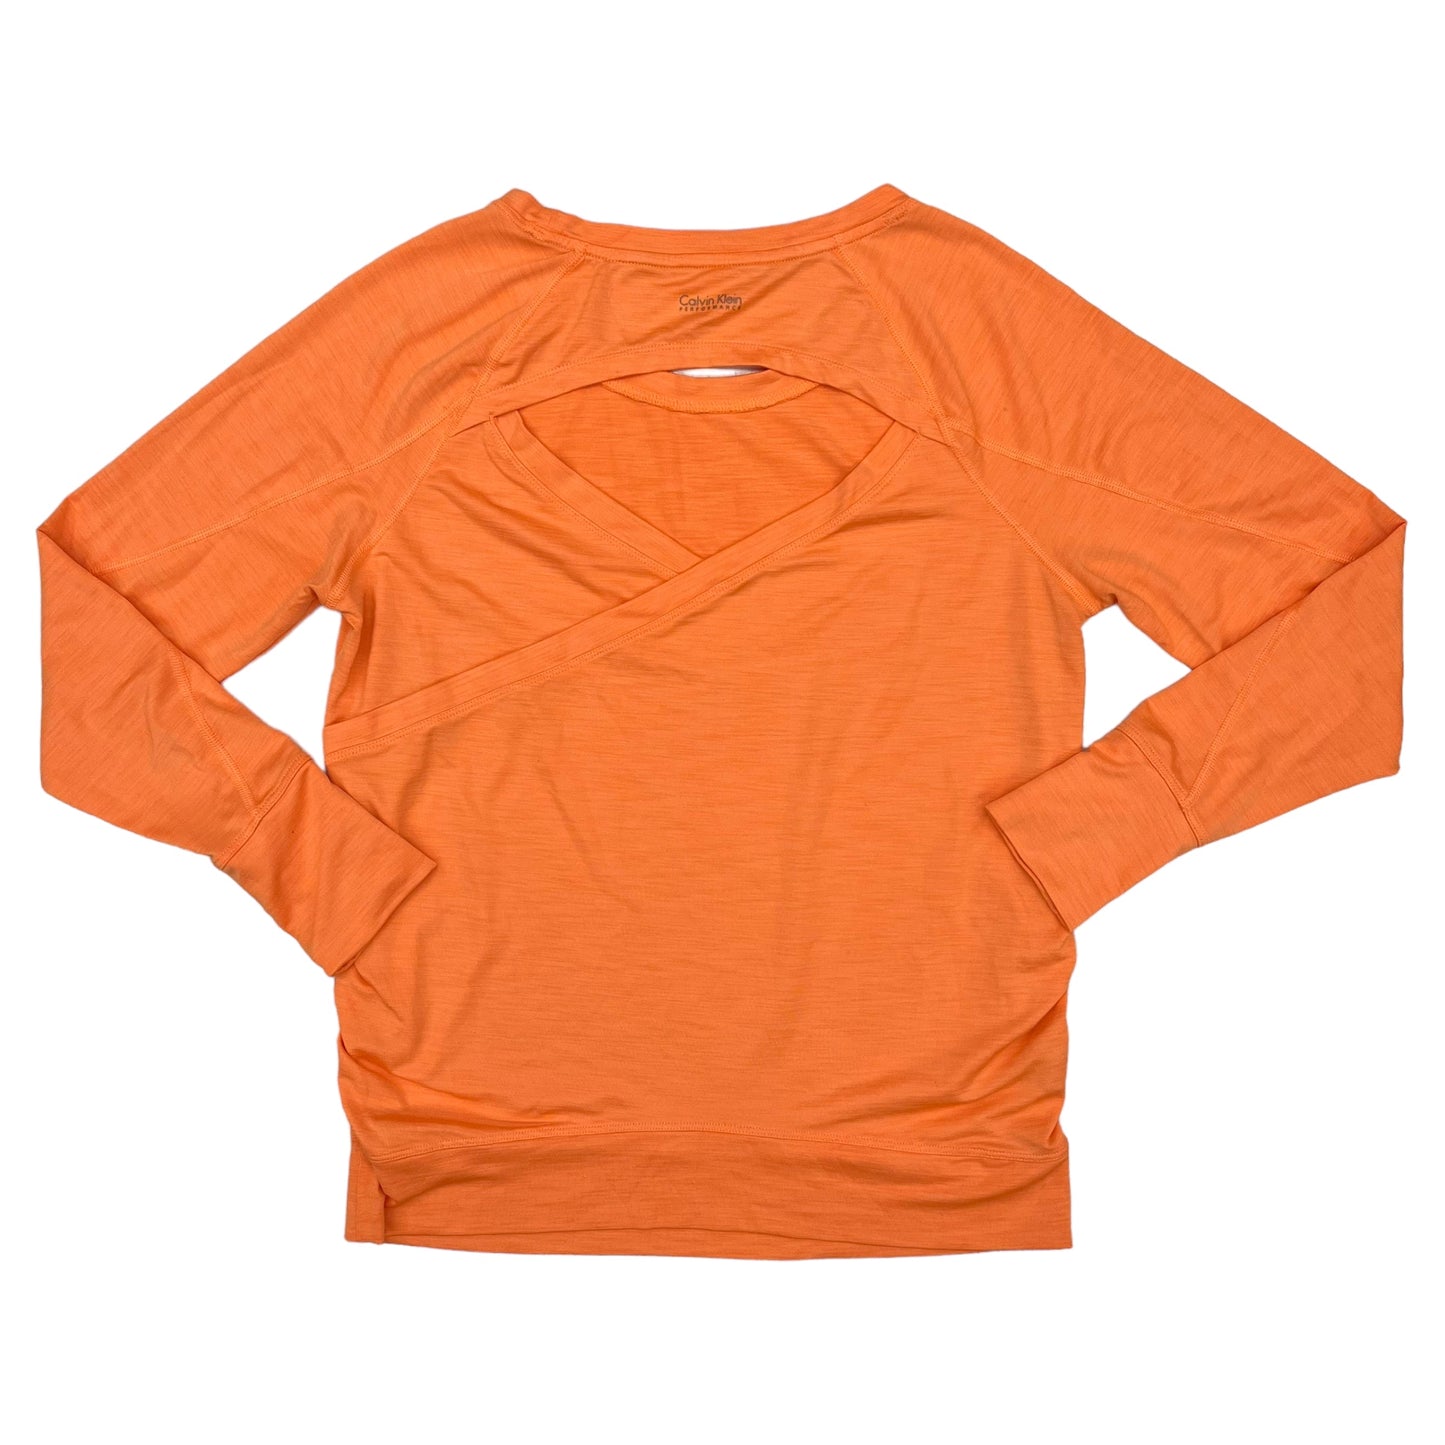 Athletic Top Long Sleeve Crewneck By Calvin Klein Performance  Size: M